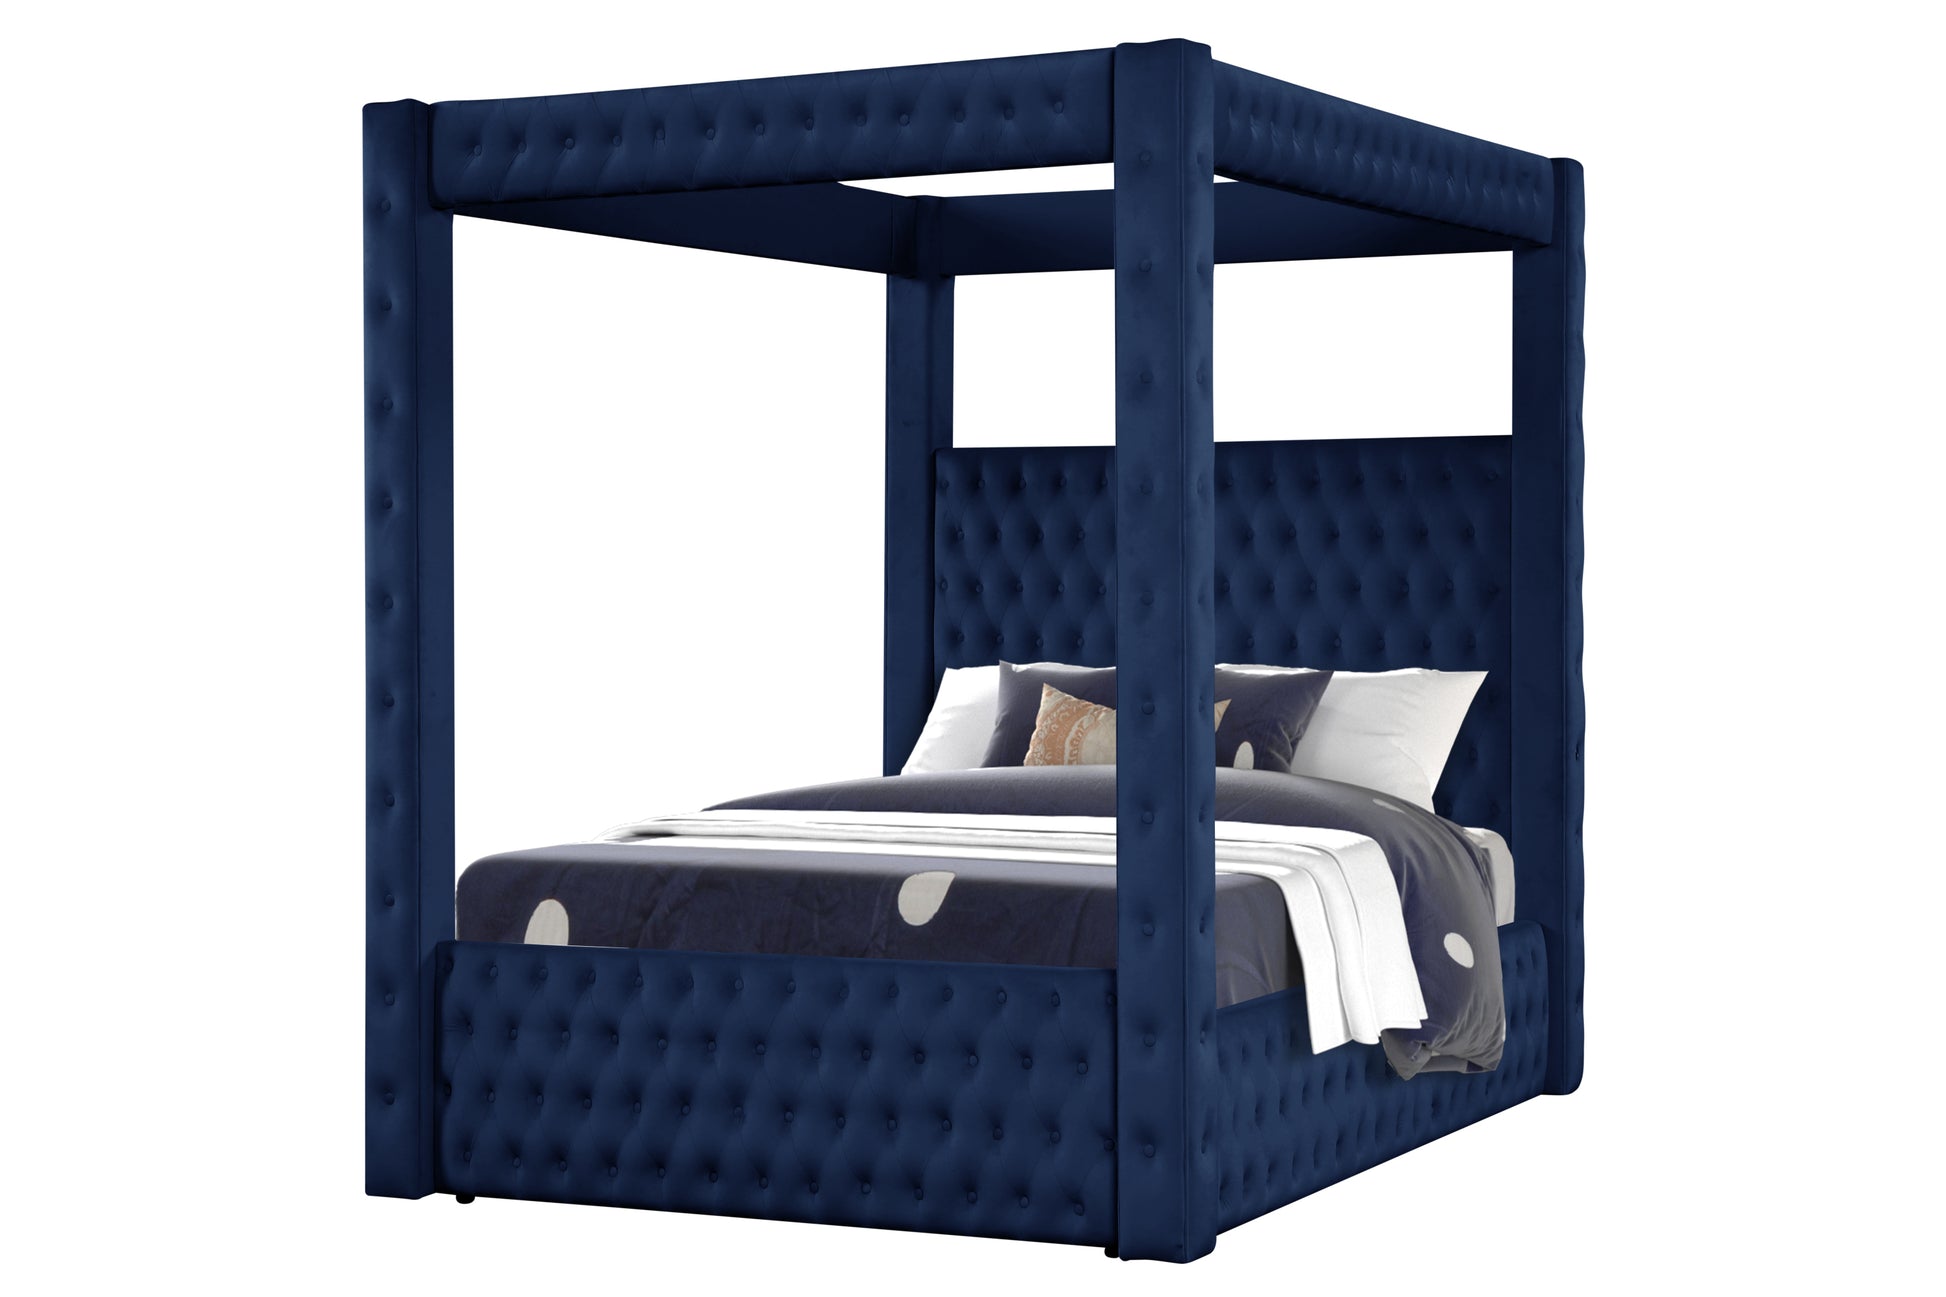 Monica luxurious Four-Poster King 4 Pc Bedroom Set Made with Wood in Navy - Enova Luxe Home Store